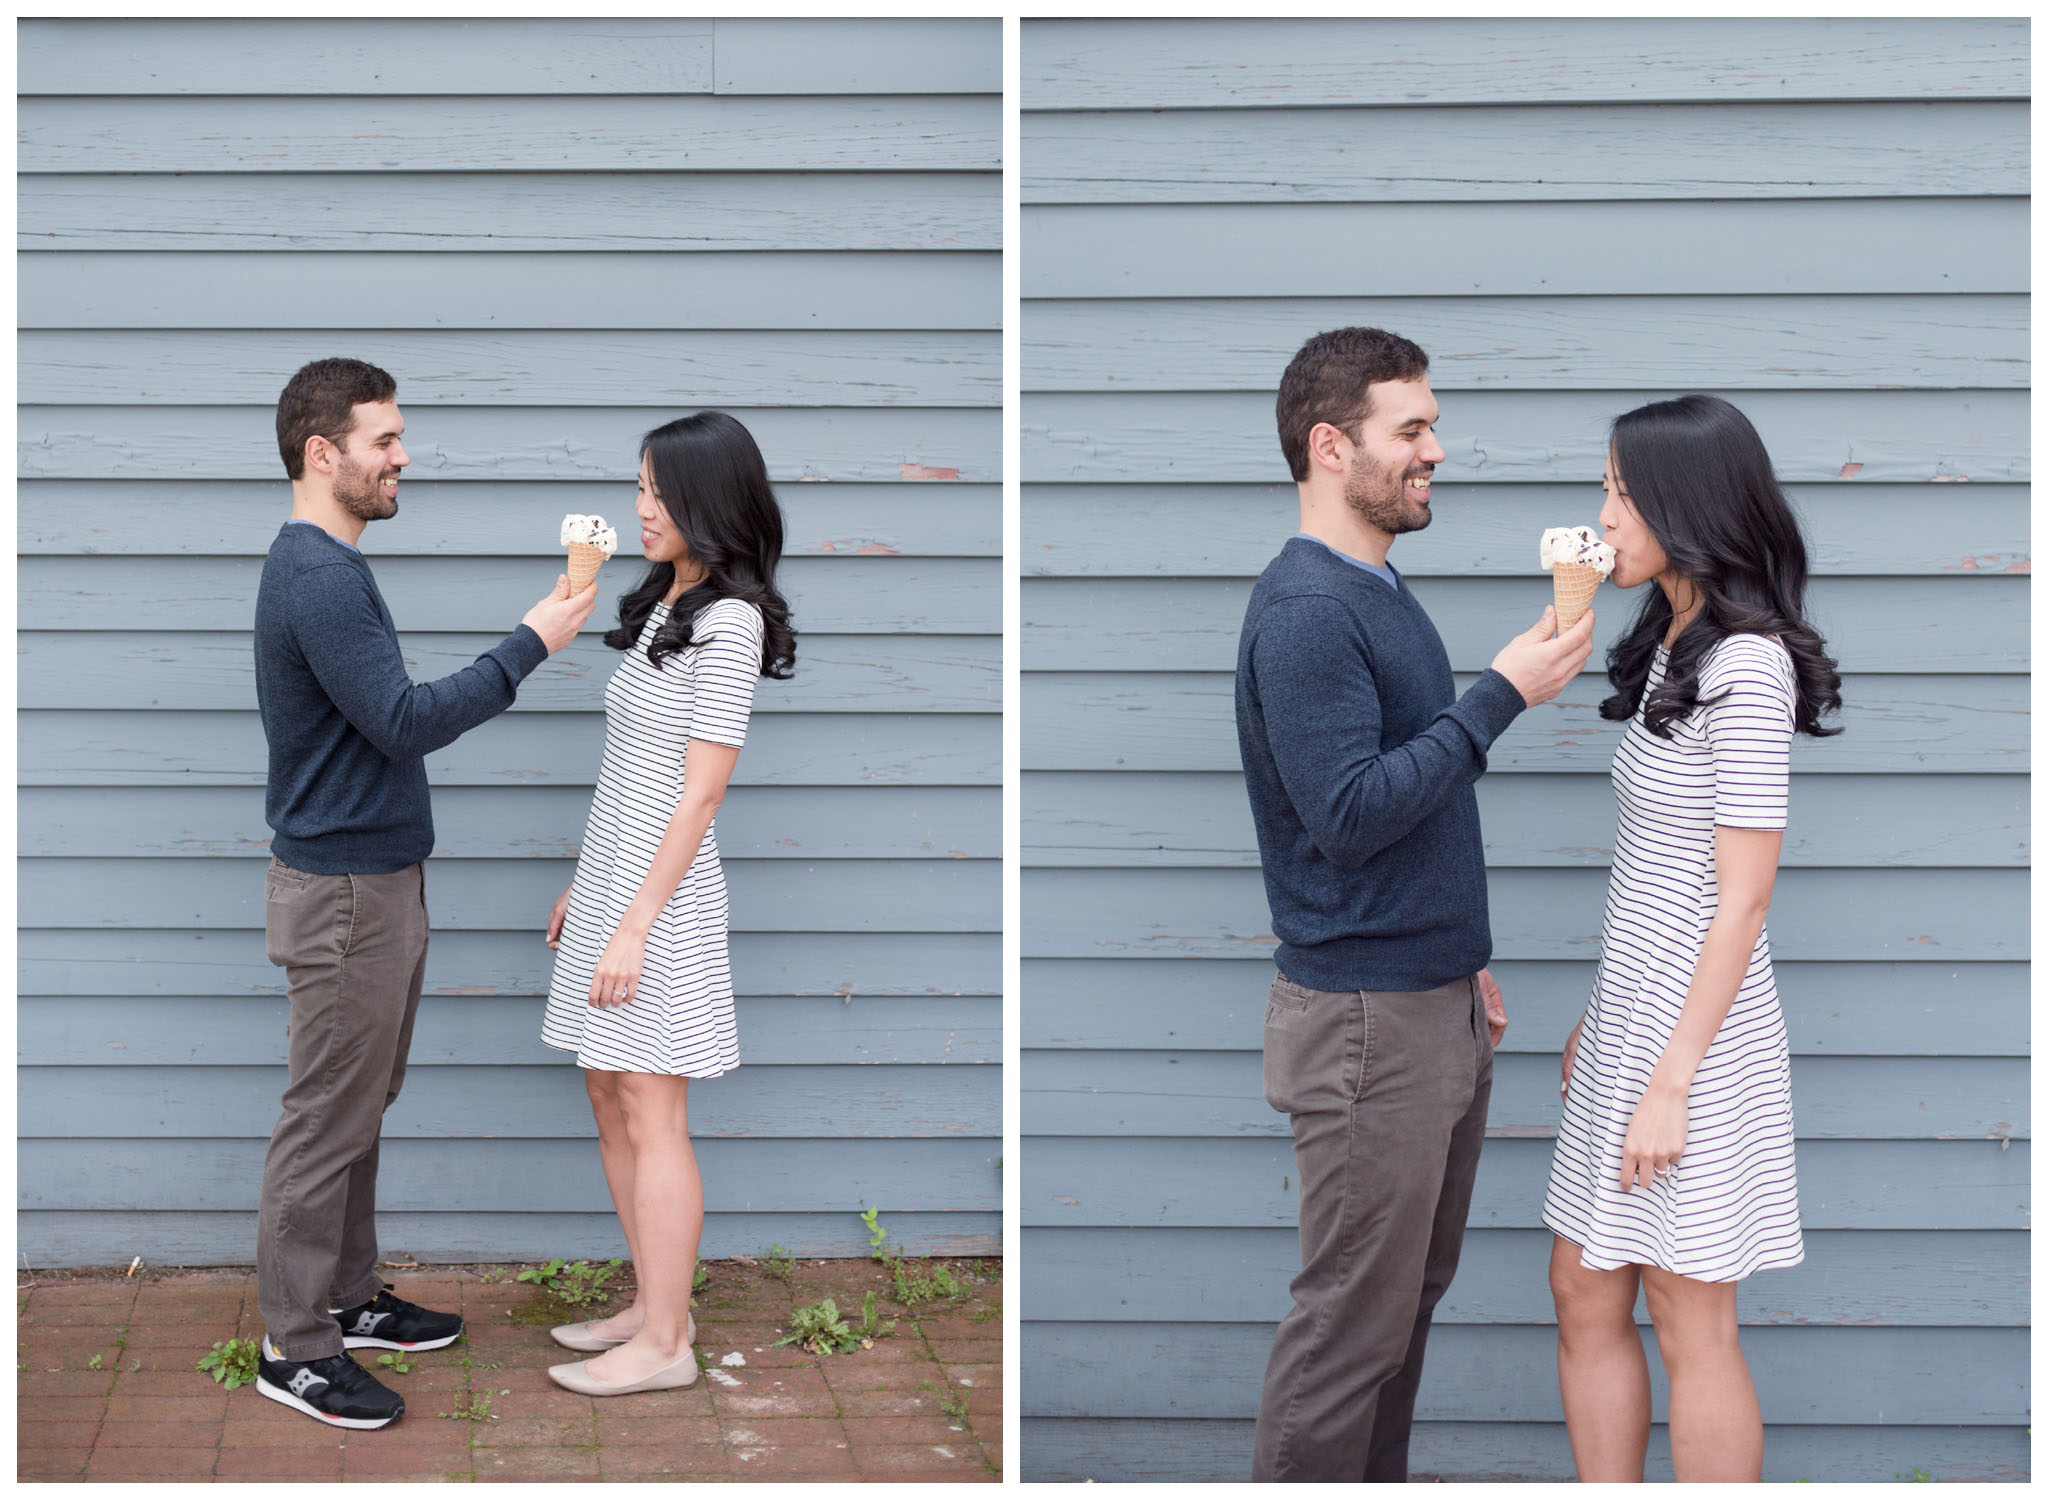 cold spring putnam county engagement photographer hudson valley ny ice cream cones